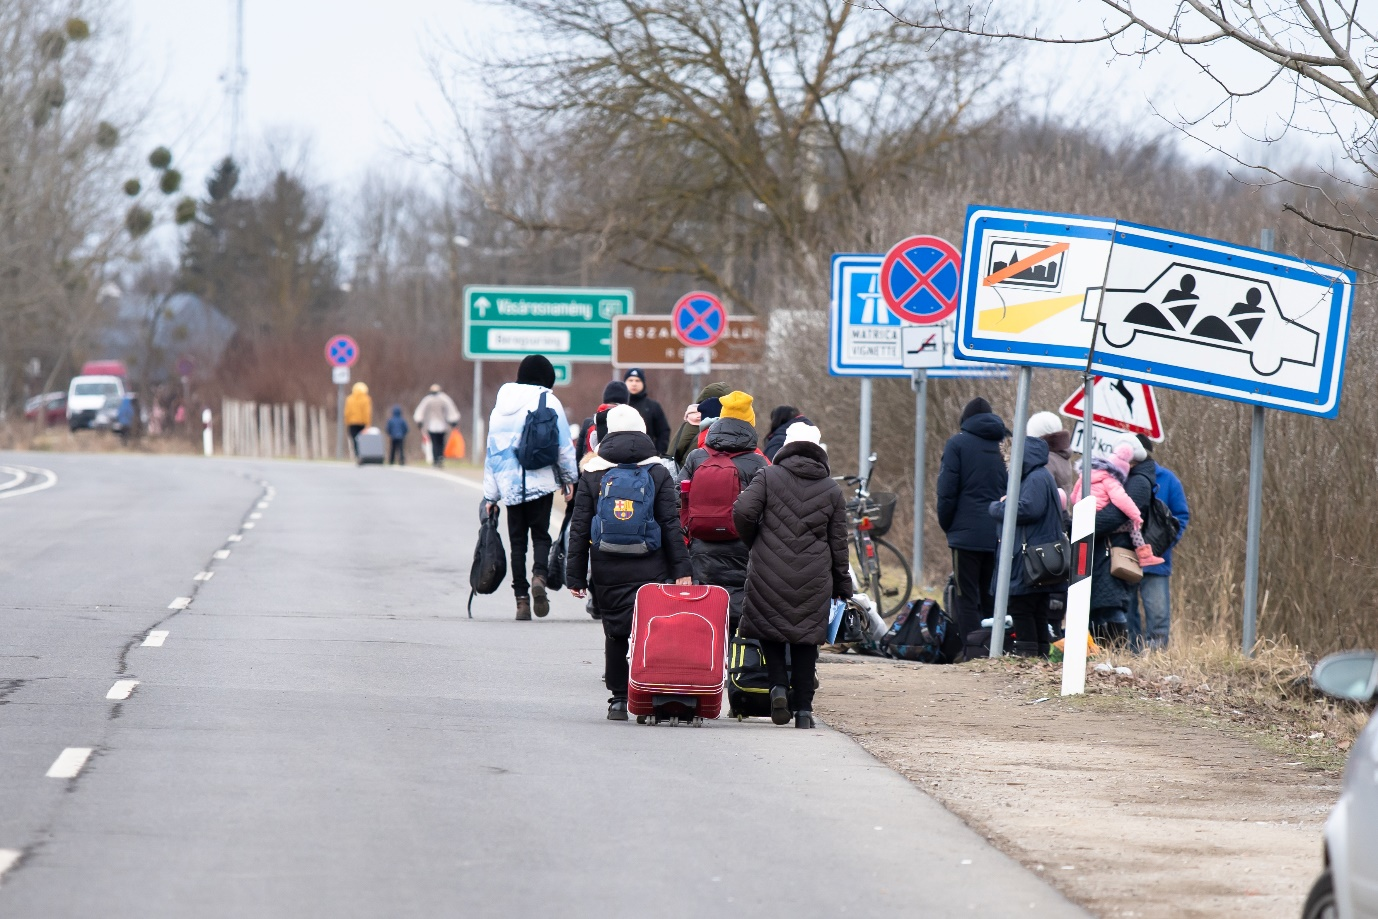 Joined Nations Refugee Agency Reports 660,000 Ukrainian Refugees Have Fled Since Russia Invaded Ukraine